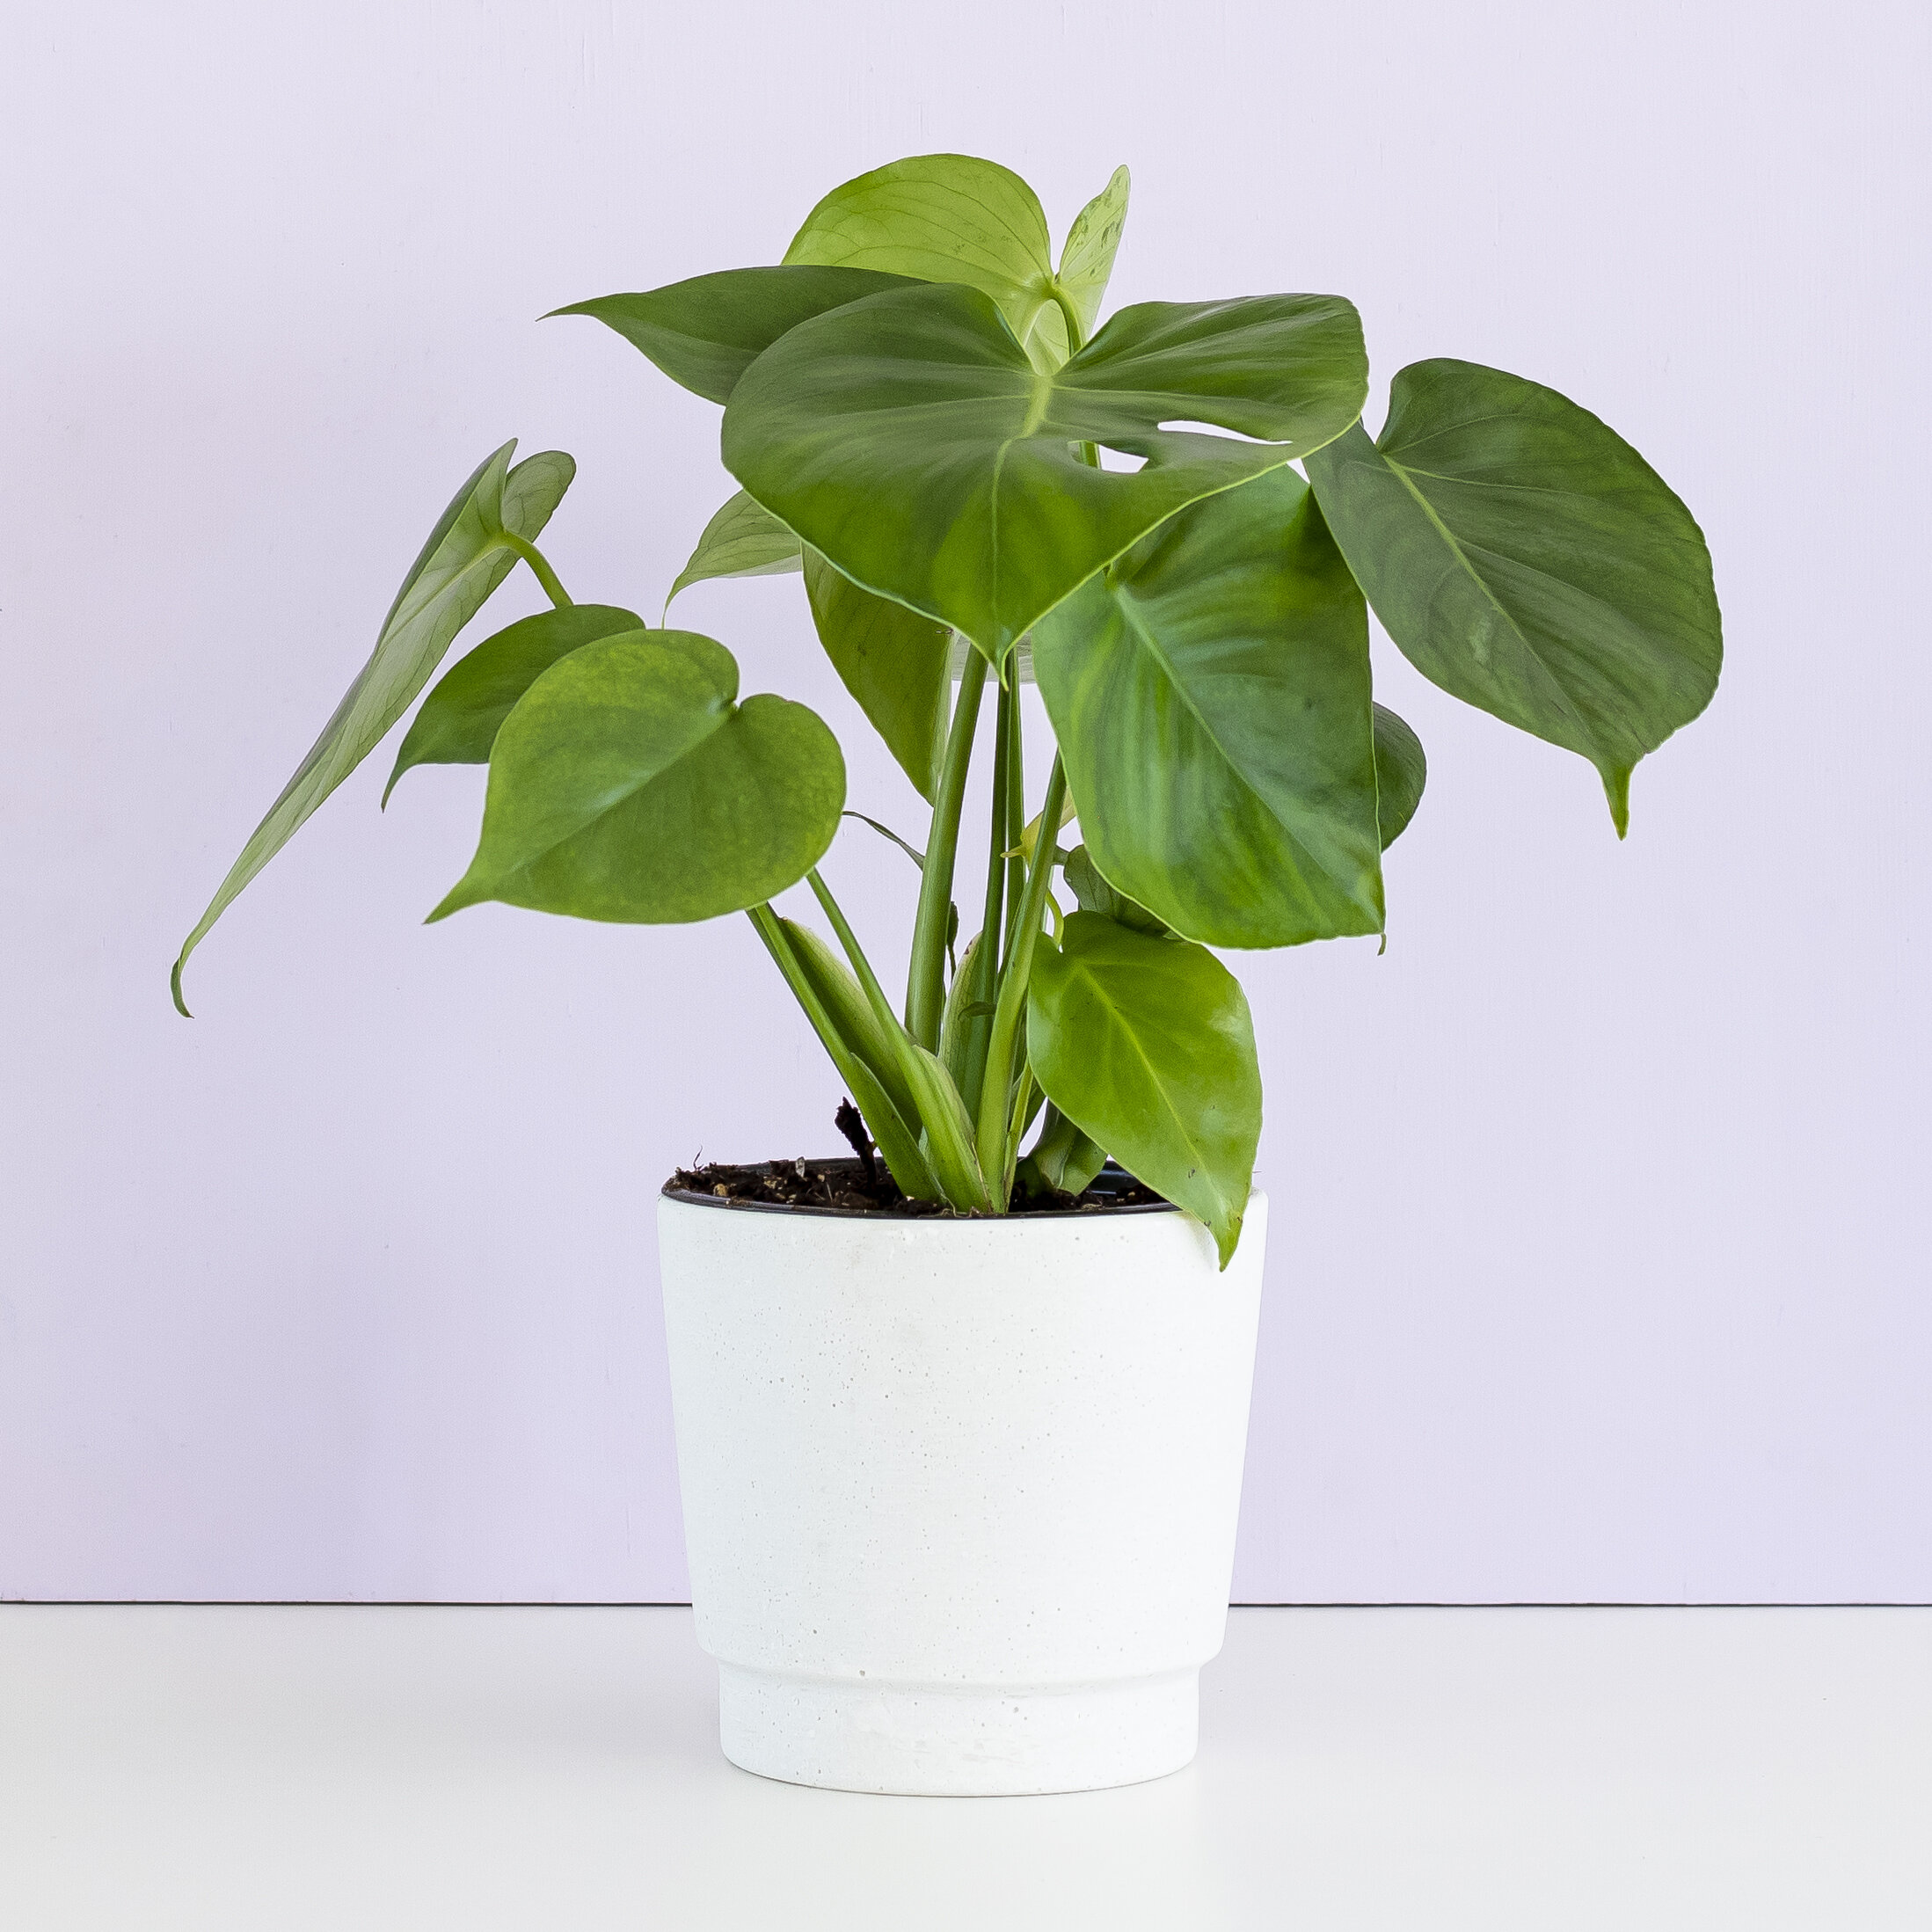 A green Monstera Deliciosa plant in a white pot placed in front of a lavender background